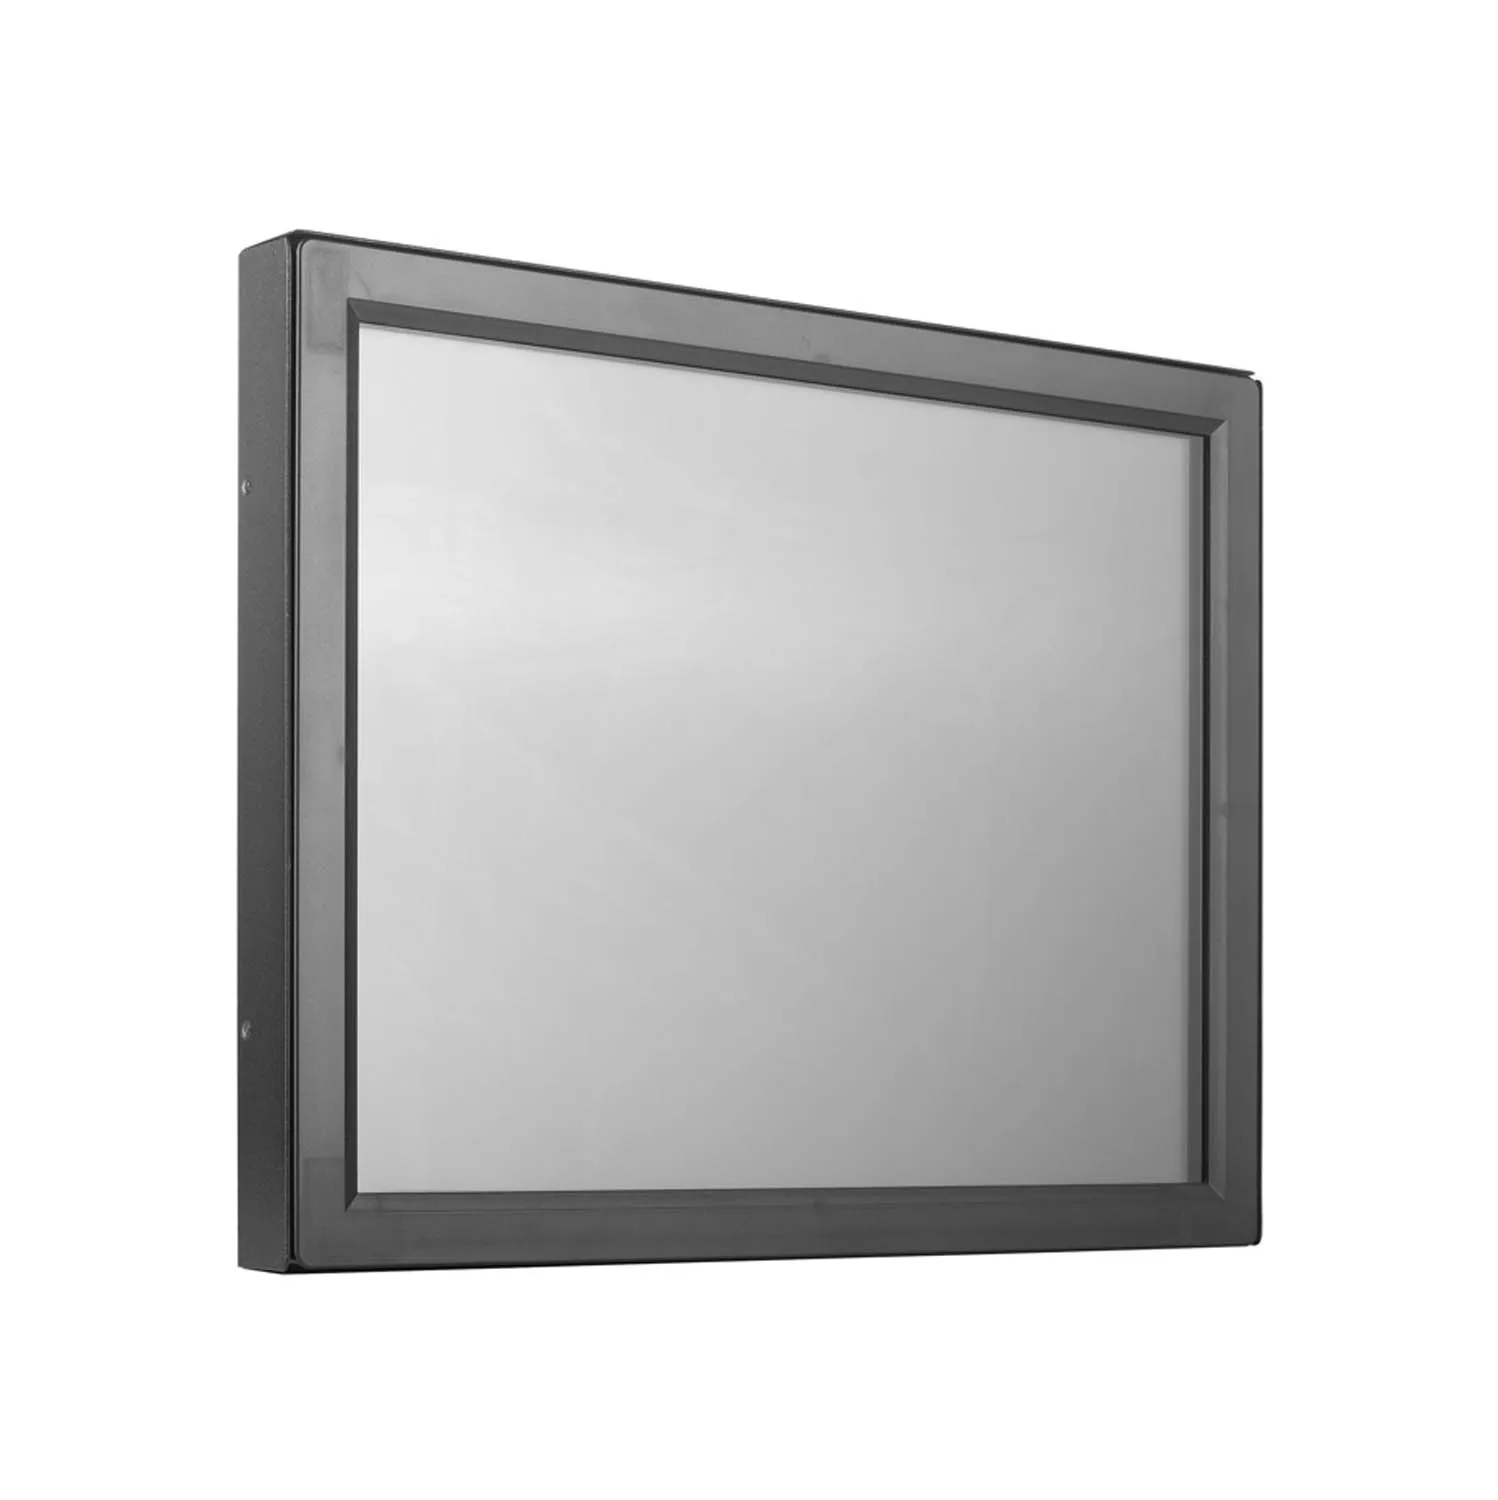 INDUSTRIAL OPEN FRAME NON-TOUCH MONITOR 15" KM-150-NW0S001